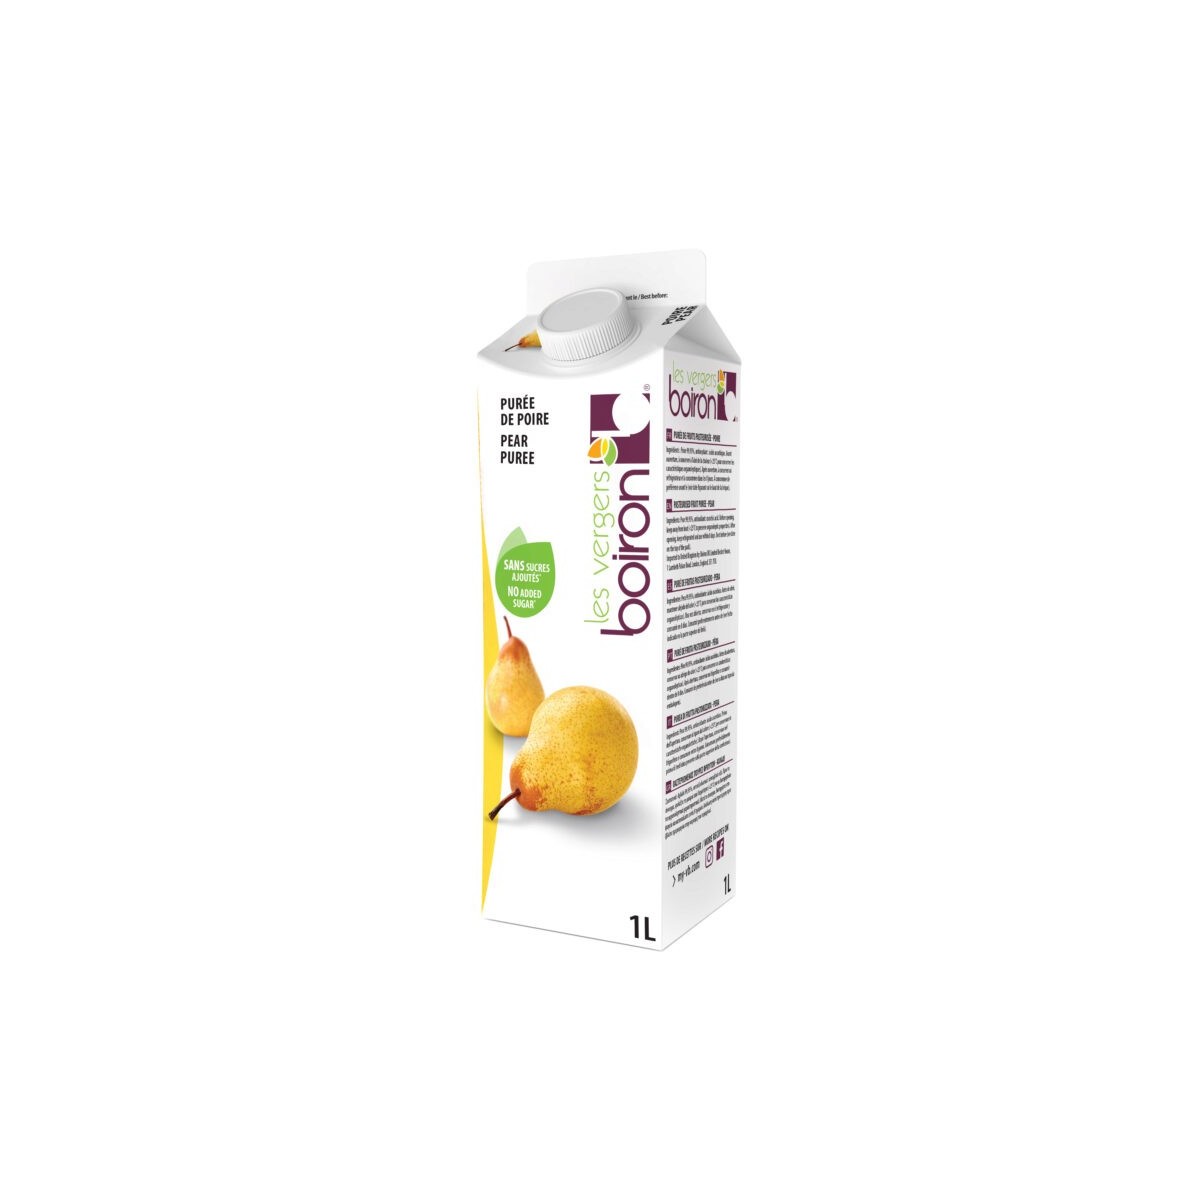 BOIRON PUREE OF PEAR PASTEURIZED 100 6X1L  BOTTLE